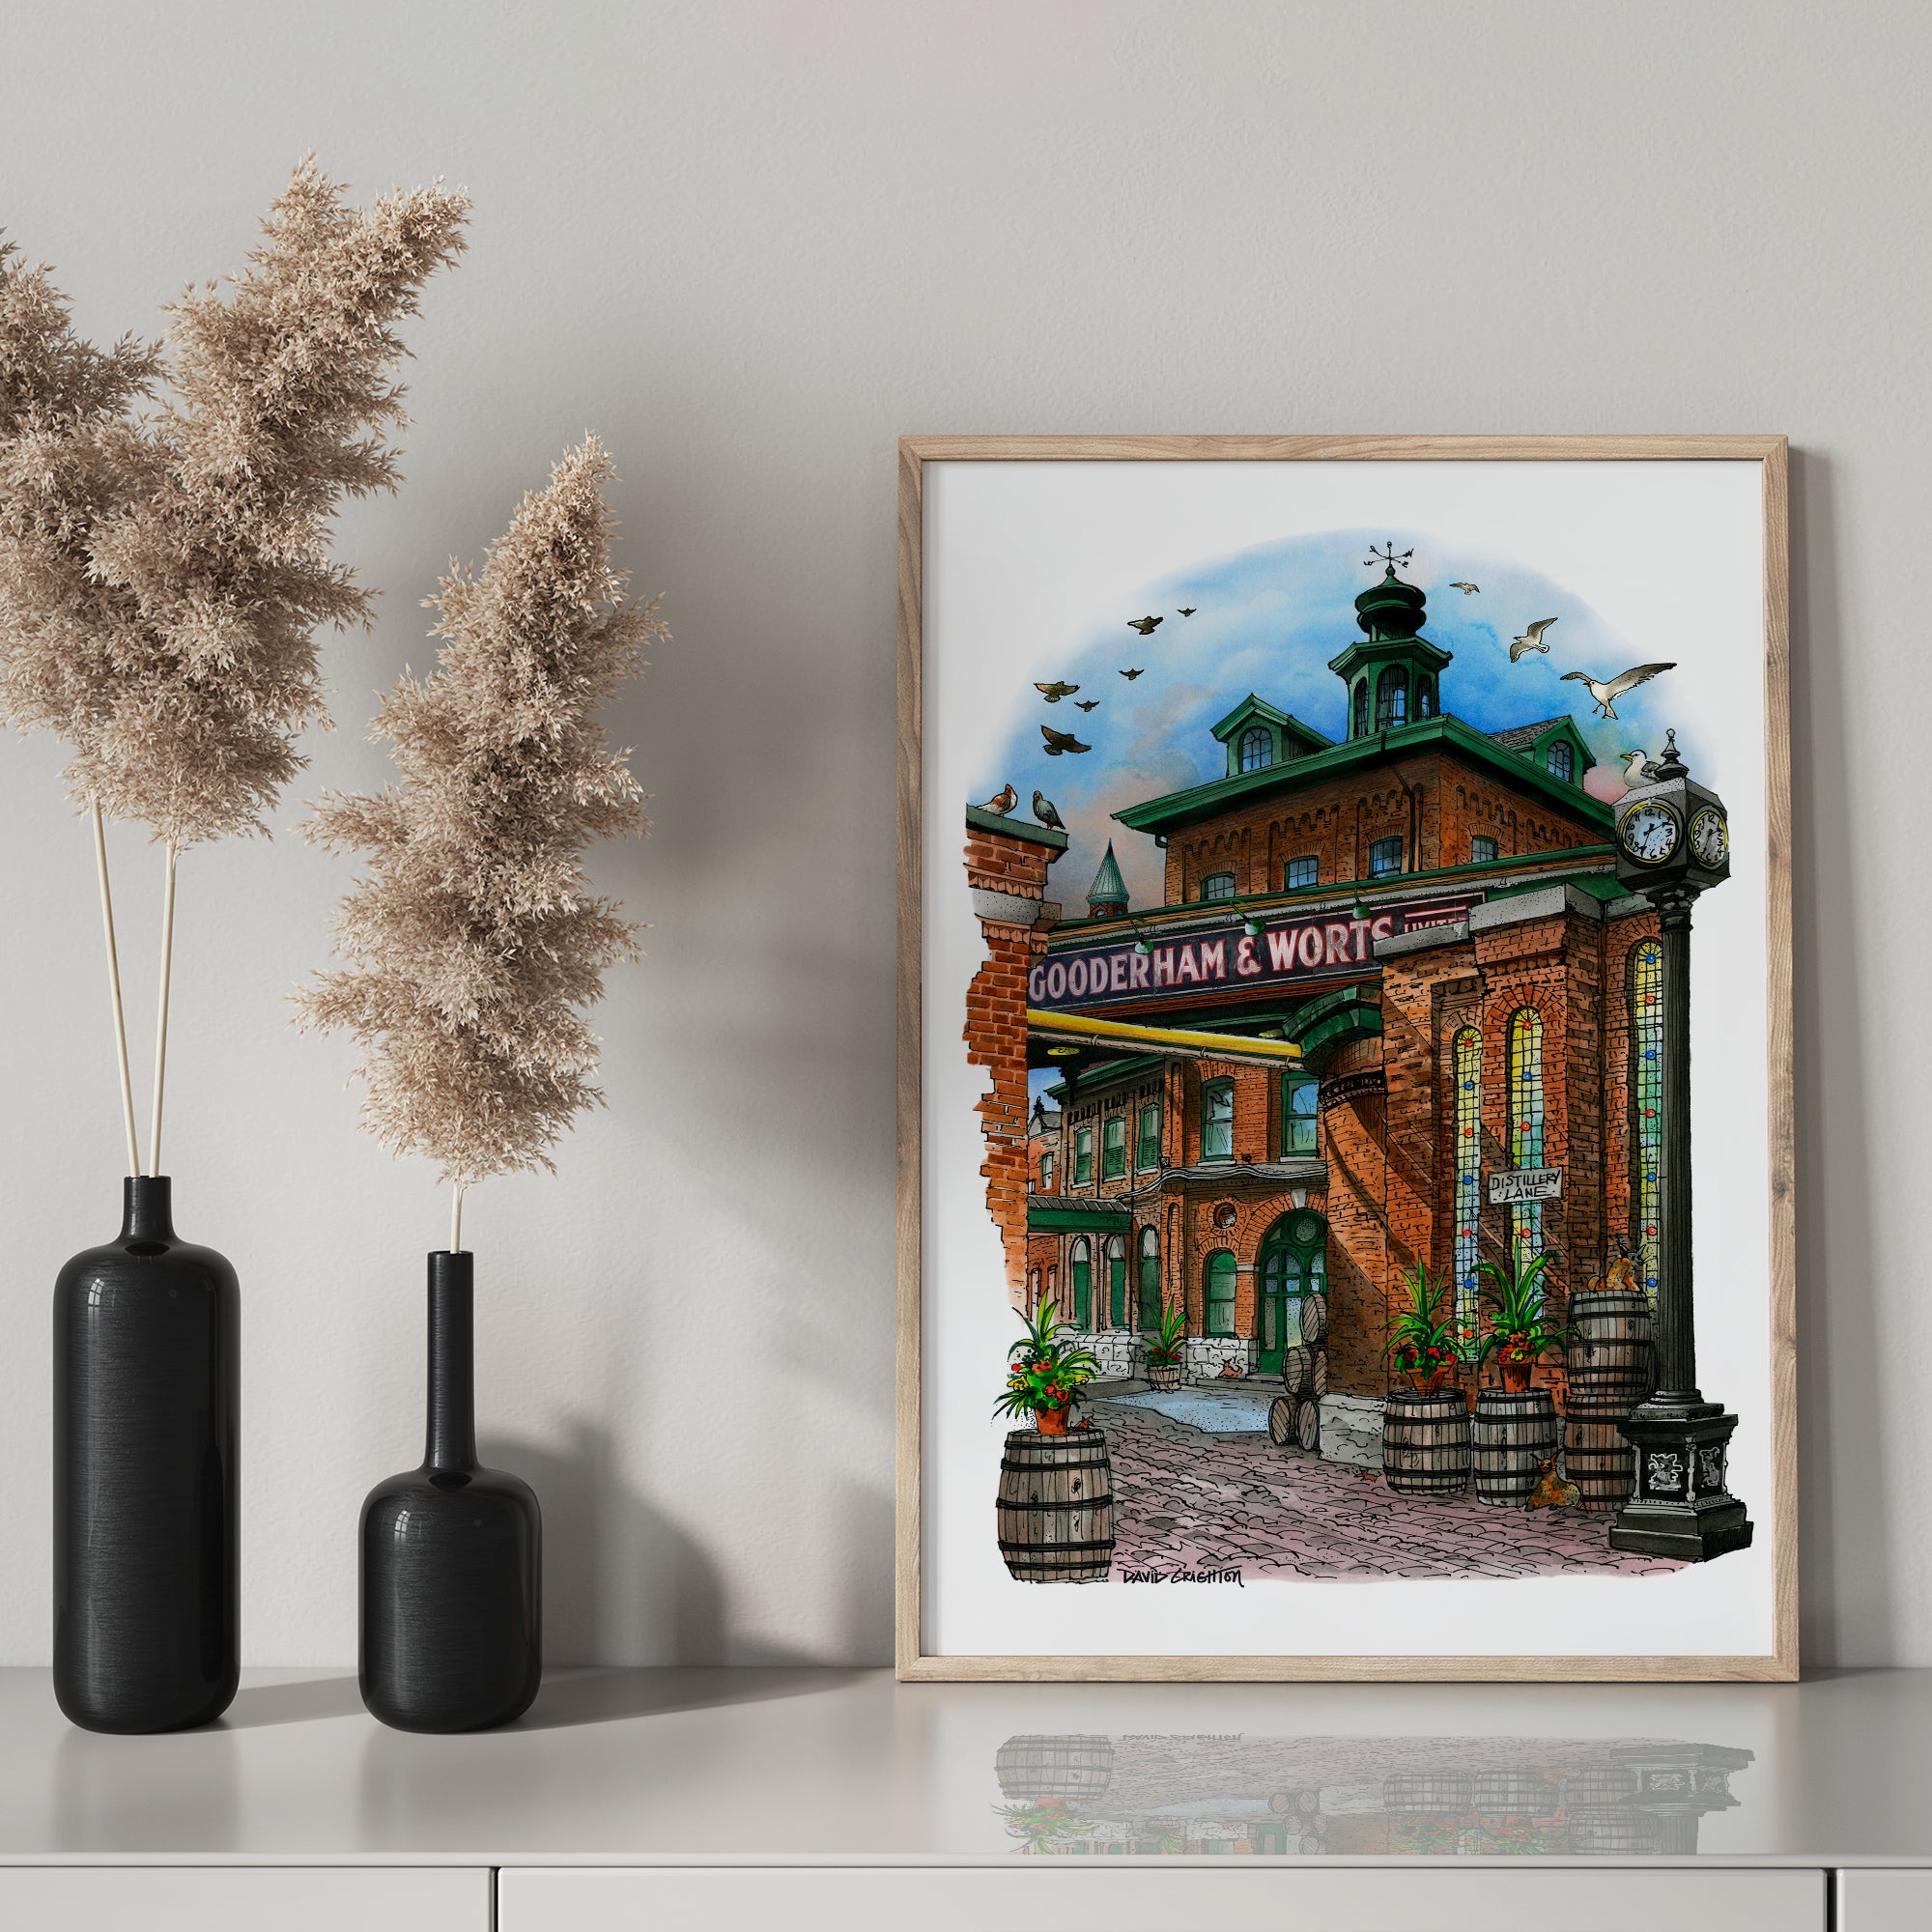 Framed Distillery District Poster on Mantelpiece with Pampas Grass in Vases